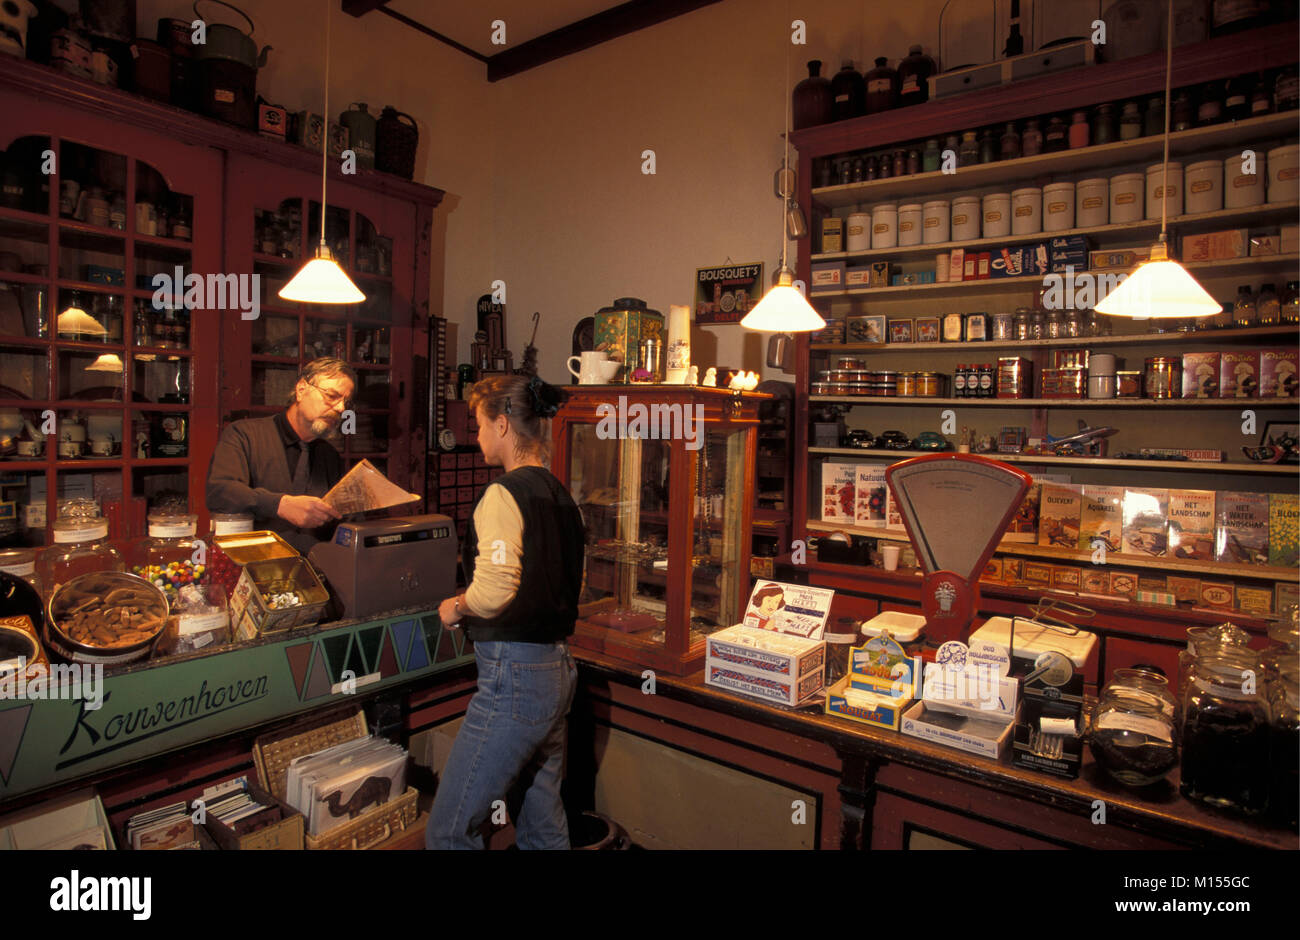 The Netherlands. Delft. Interior of museum-shop called Kouwenhoven. Ancient grocery shop. Stock Photo